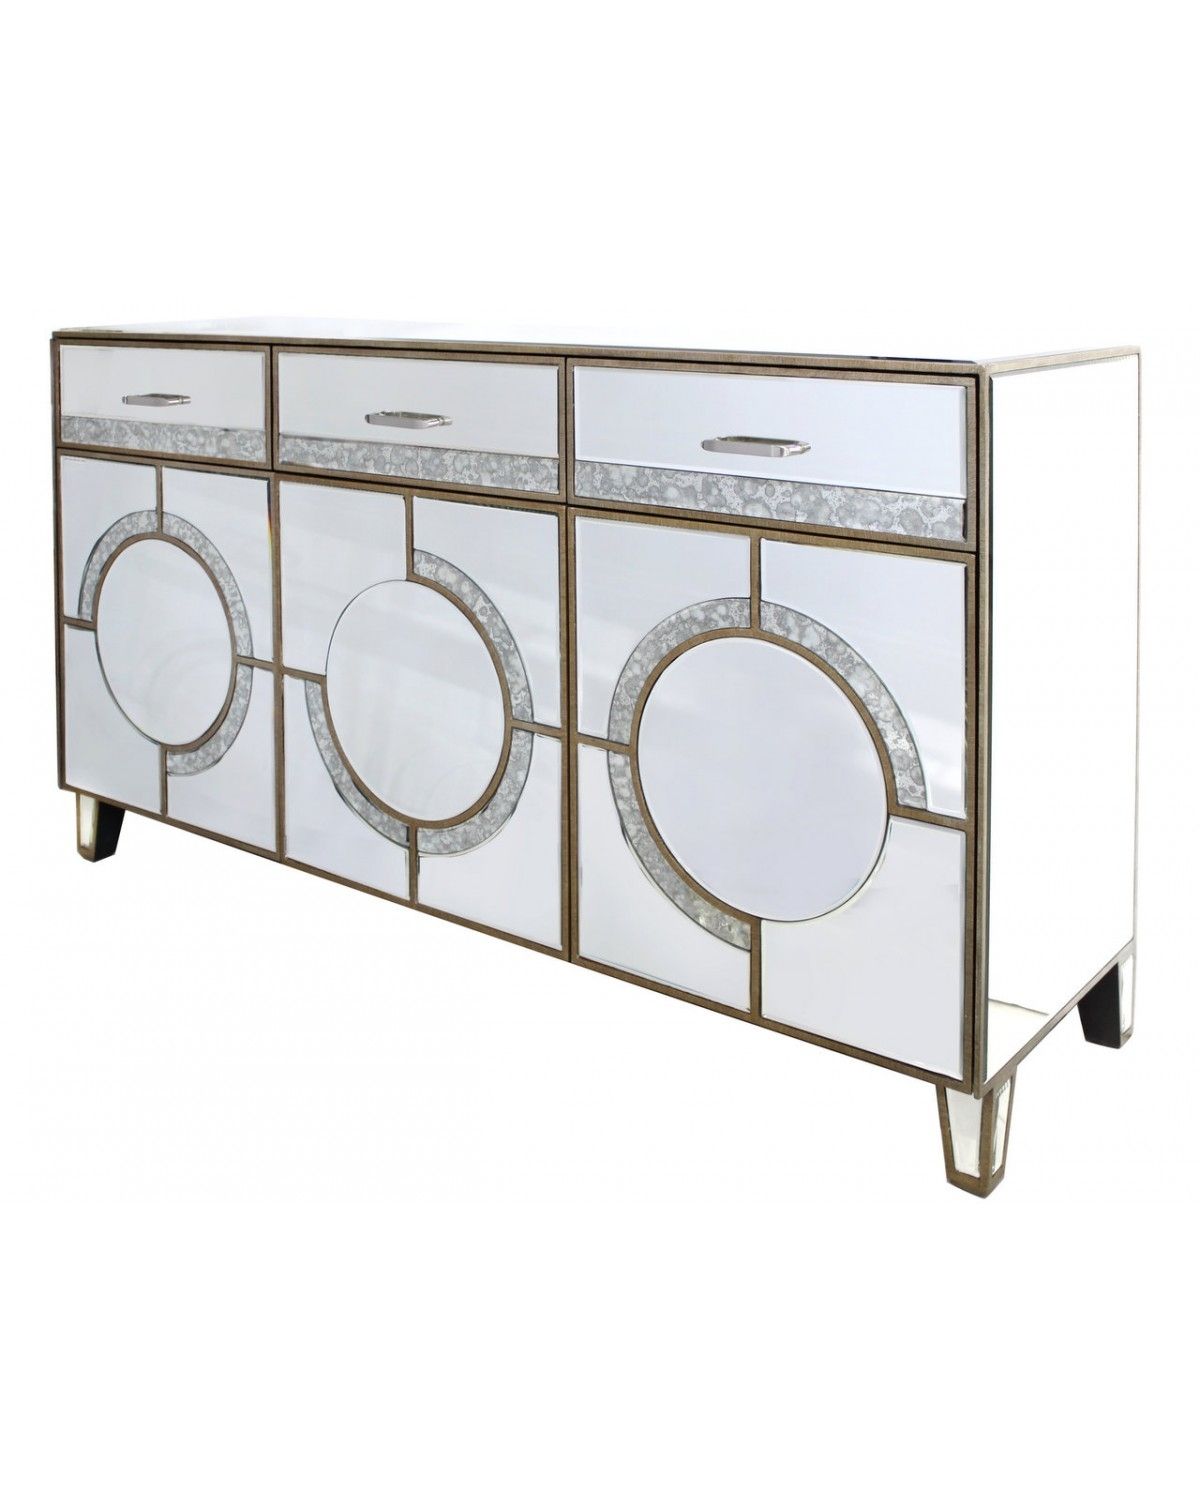 Gatsby Antique Mirror Sideboard | Cimc Home Intended For Most Popular Diamond Circle Sideboards (View 4 of 20)